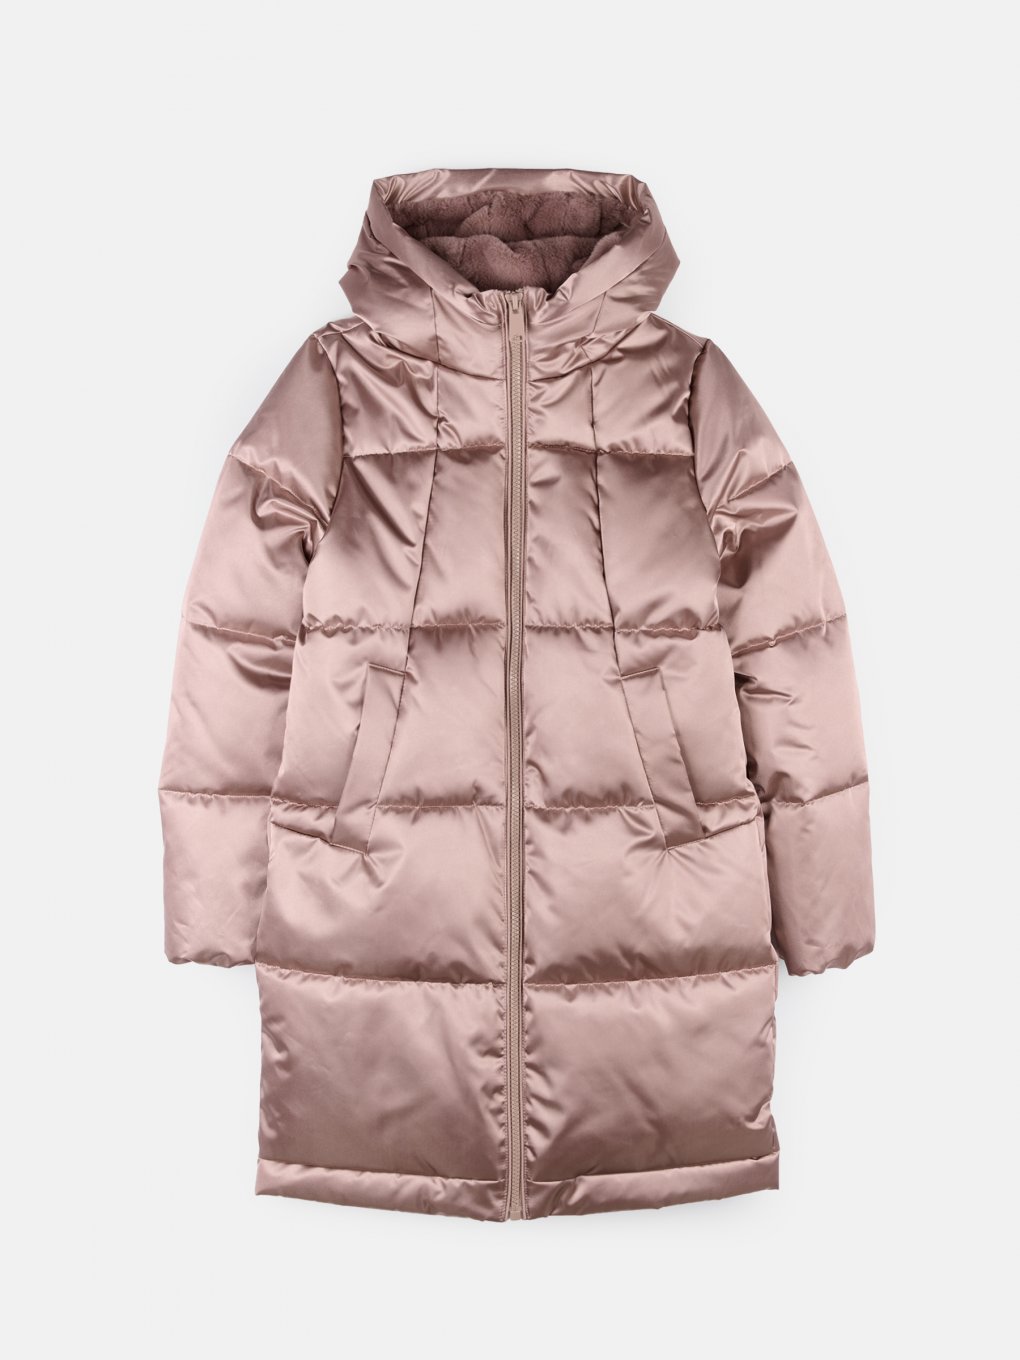 Shiny quilted winter jacket